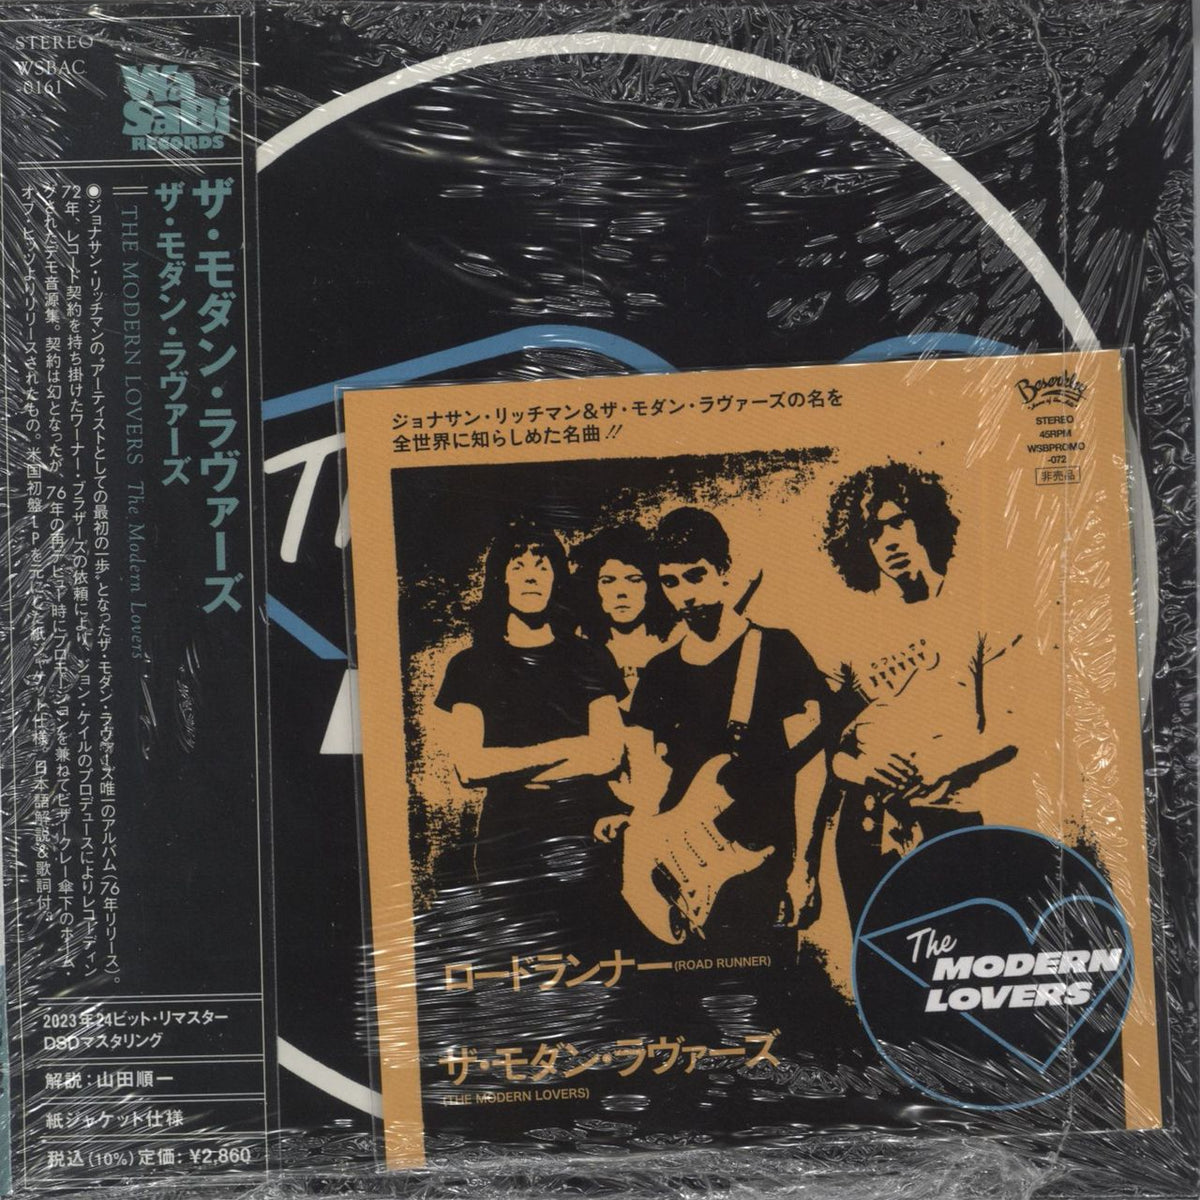 Jonathan Richman & The Modern Lovers The Modern Lovers: Remastered 